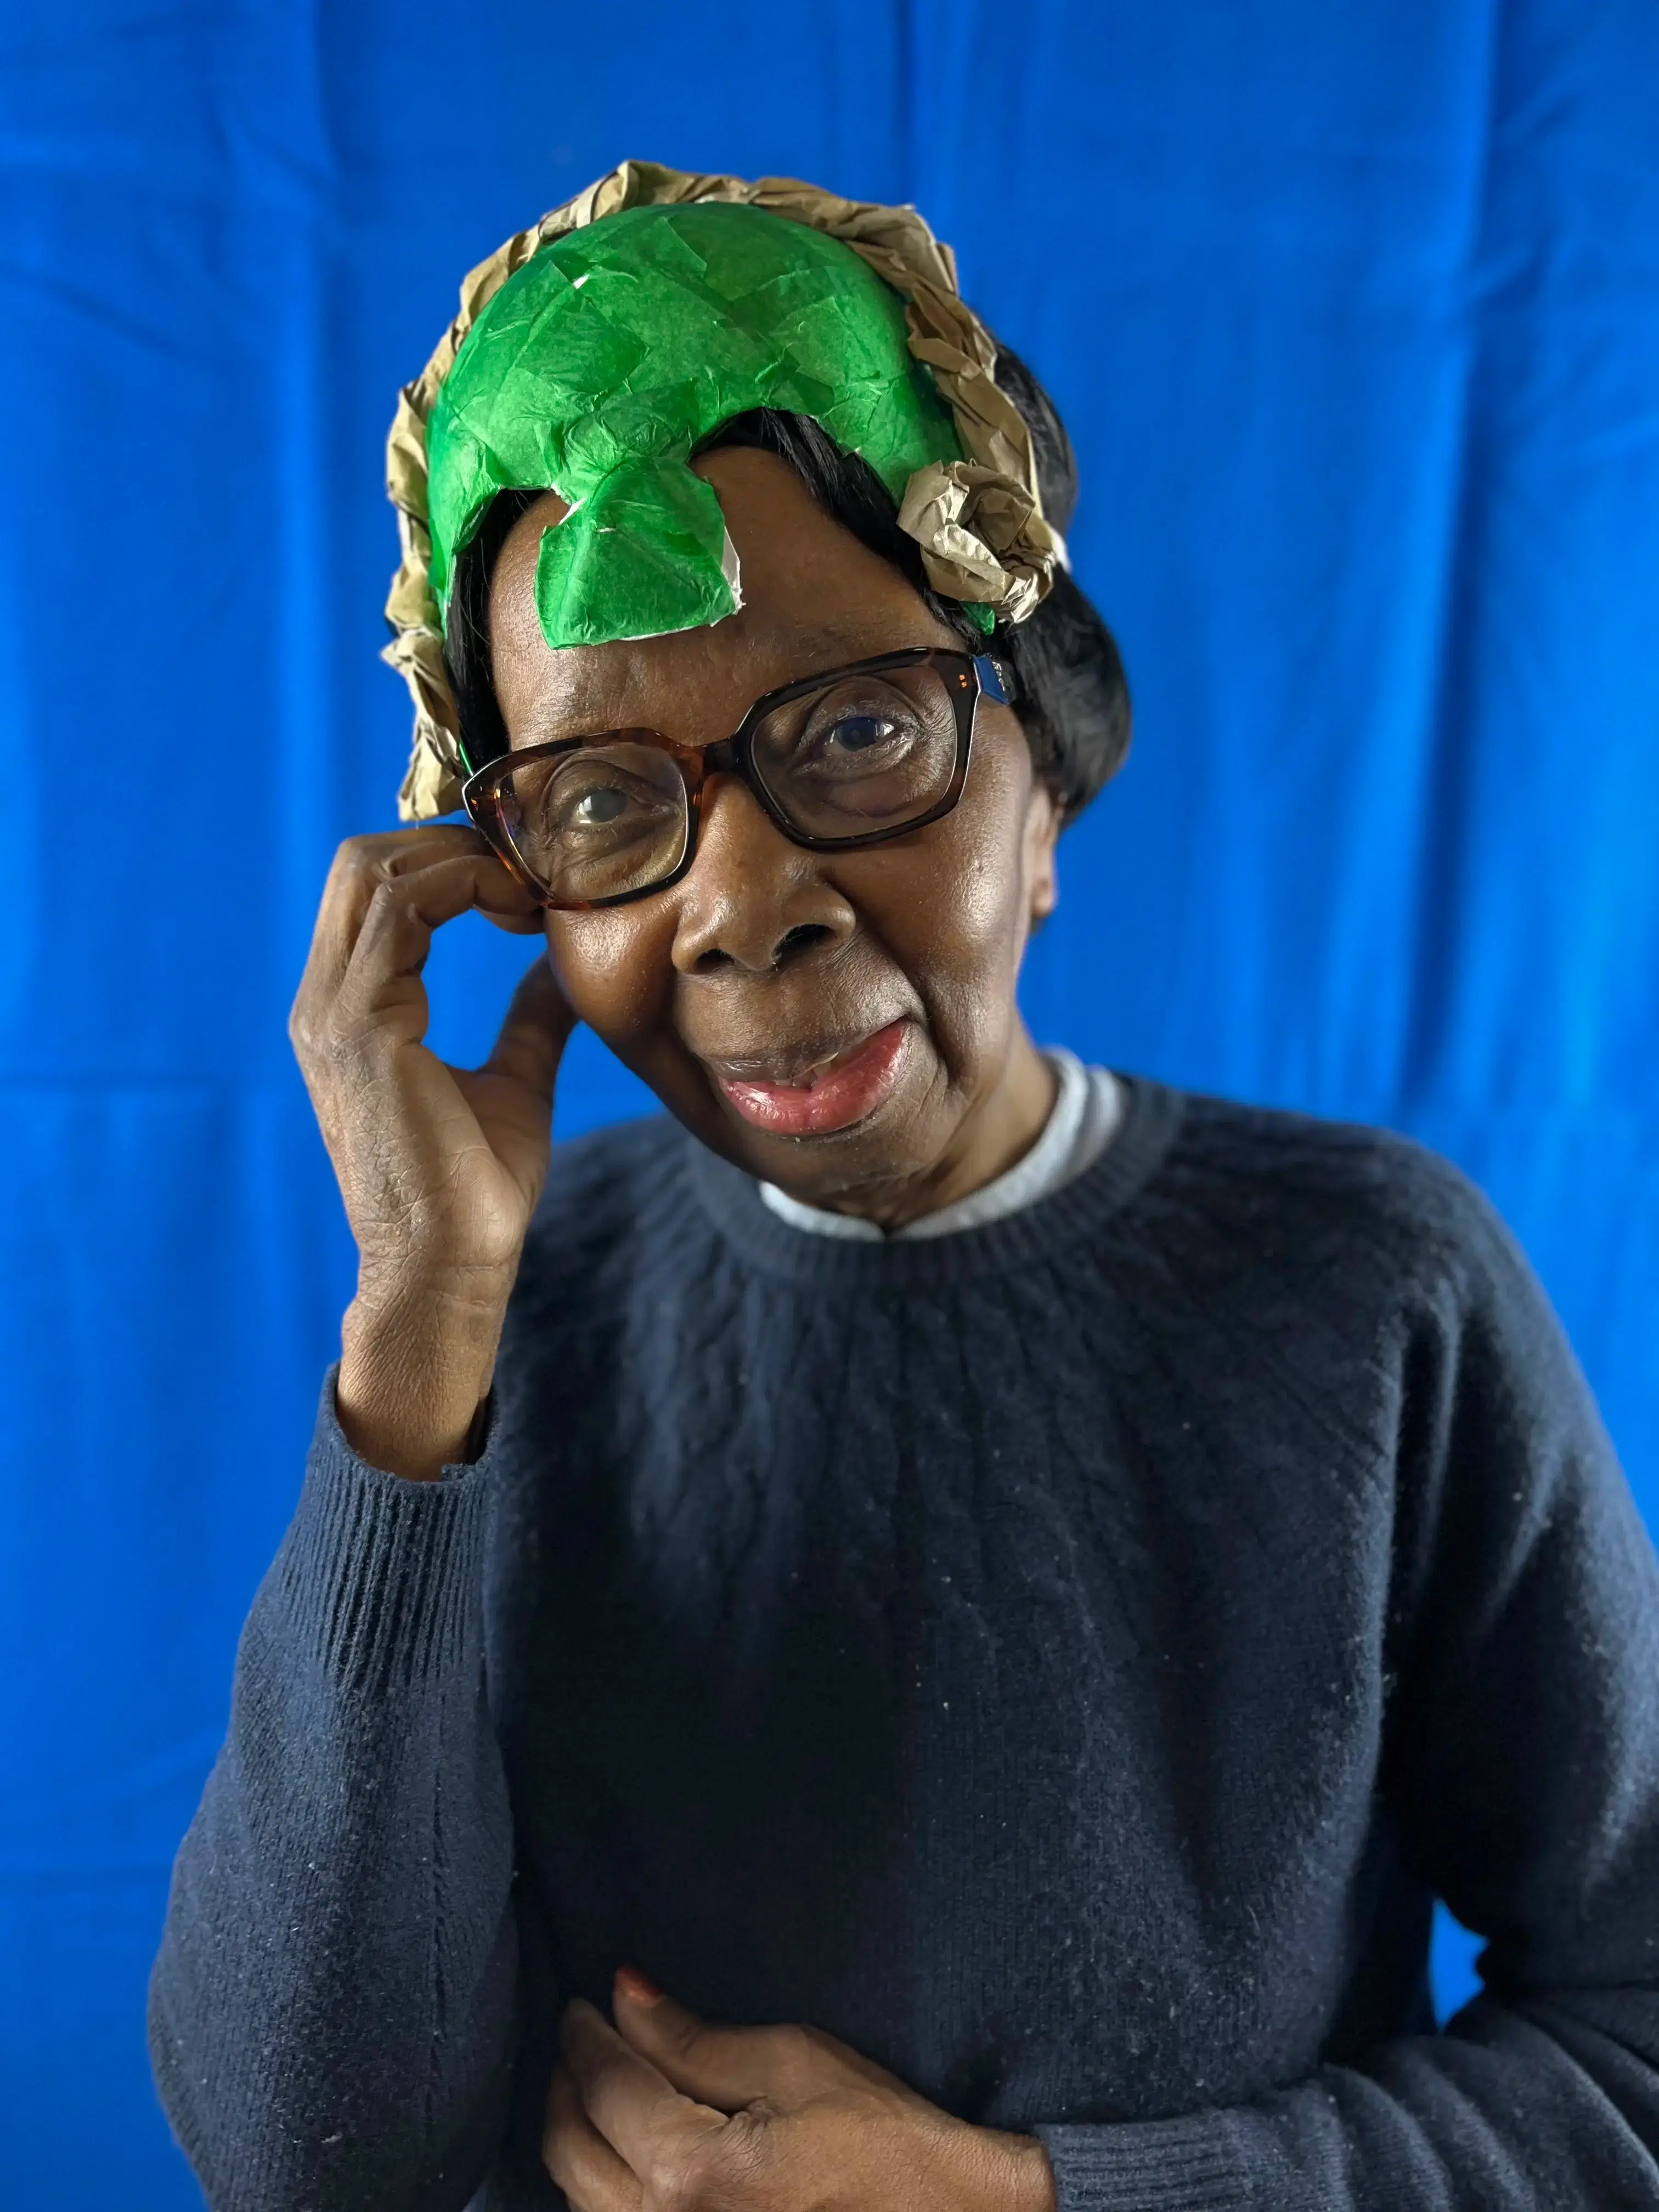 A portrait of a smiling woman wearing glasses and a colorful headwrap against a blue backdrop, with one hand playfully posed at her temple, exuding wisdom and vivacious spirit.